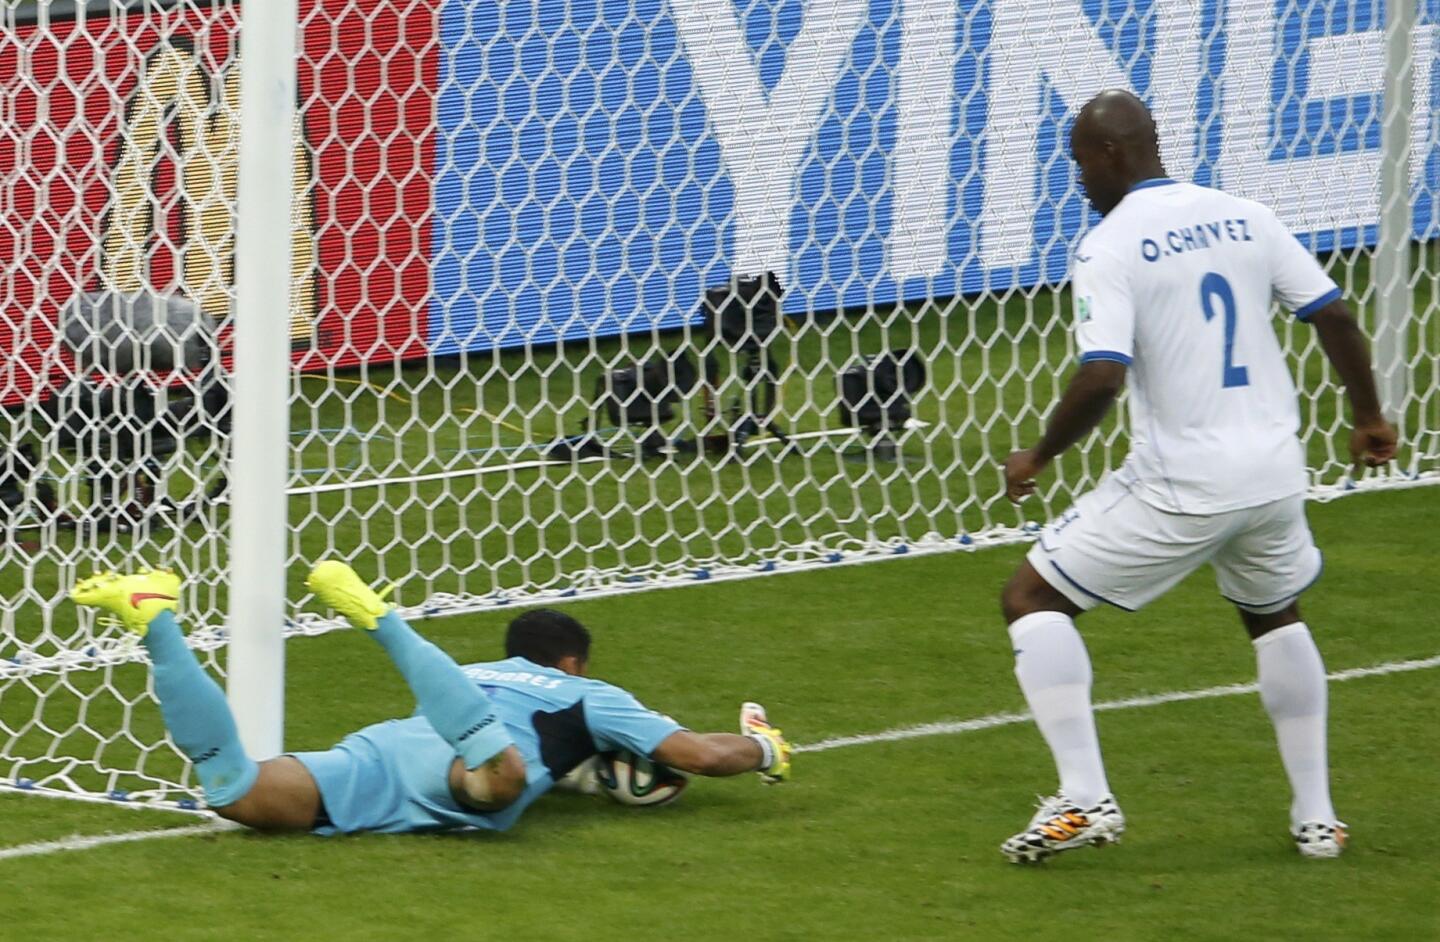 Valladares of Honduras fumbles the ball, which resulted in a goal, during their 2014 World Cup Group E soccer match against France at the Beira Rio stadium in Porto Alegre